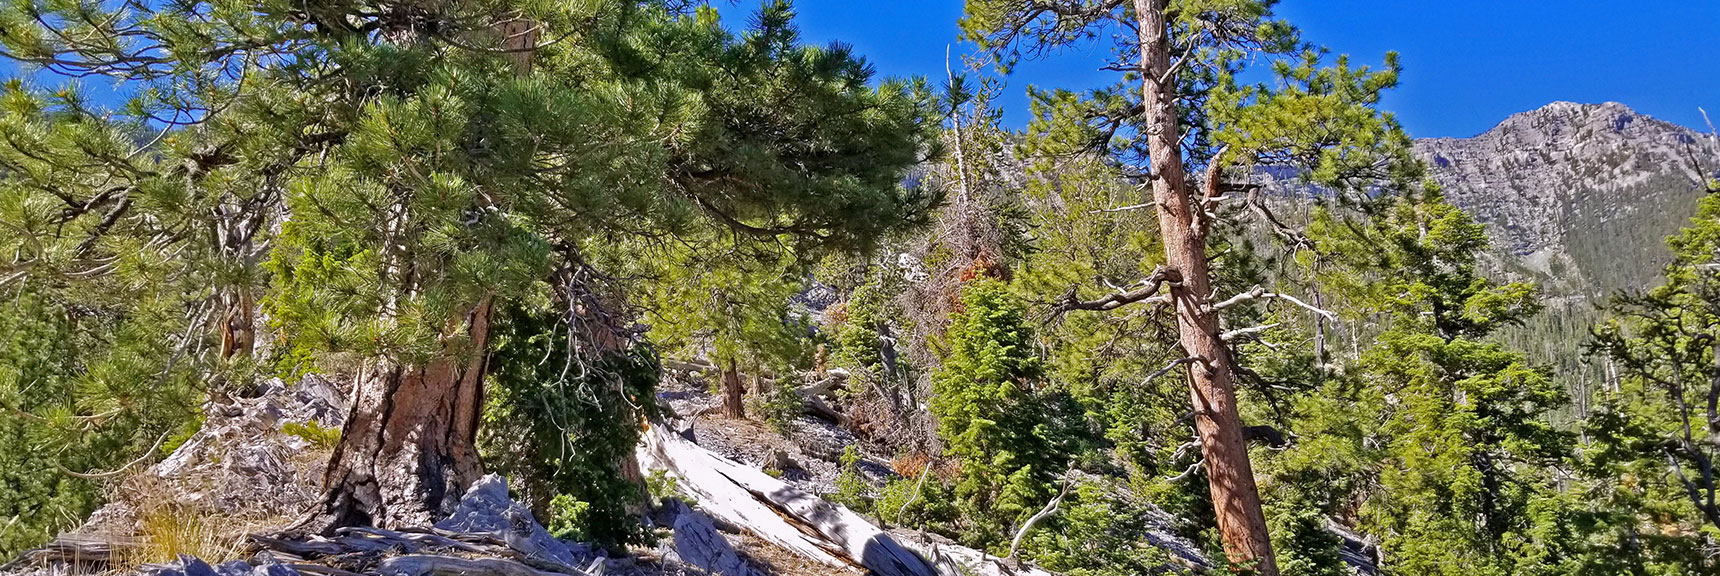 Initial Stretch Along Ridgetop is Effortless, Spectacular Views | Lee to Kyle Canyon | Gradual Mid Ridge Approach | Mt. Charleston Wilderness | Spring Mountains, Nevada